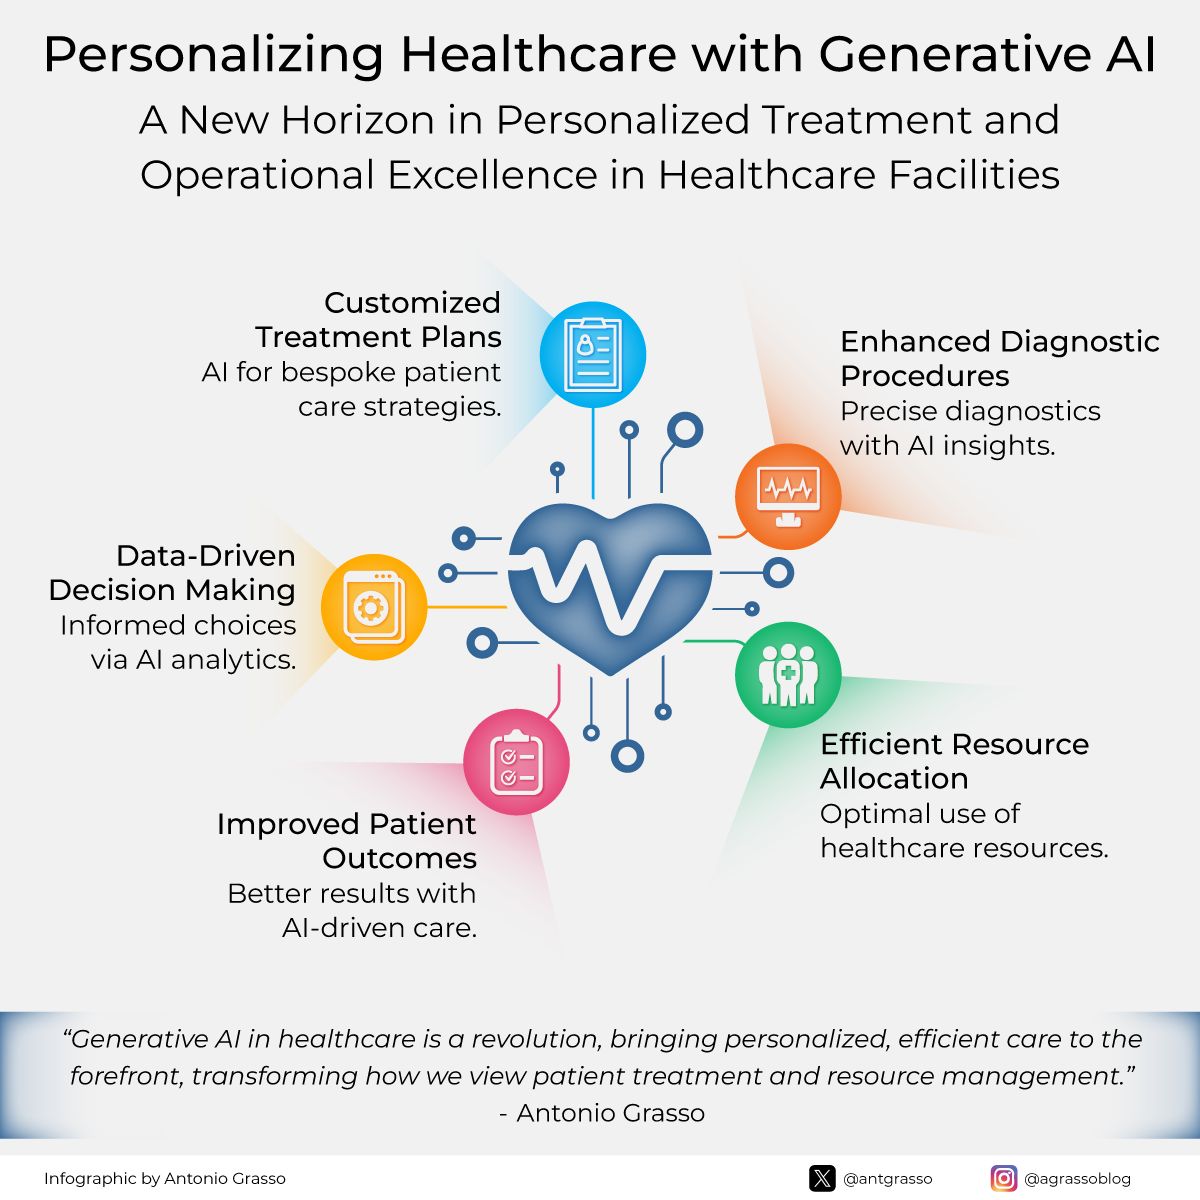 By harnessing GenerativeAI, we could aim to enhance treatment precision and efficiency and challenge the current paradigms, fostering a world where quality care becomes a universal right, not a privilege of wealth or status — like it is now on Earth. Microblog @antgrasso #AI